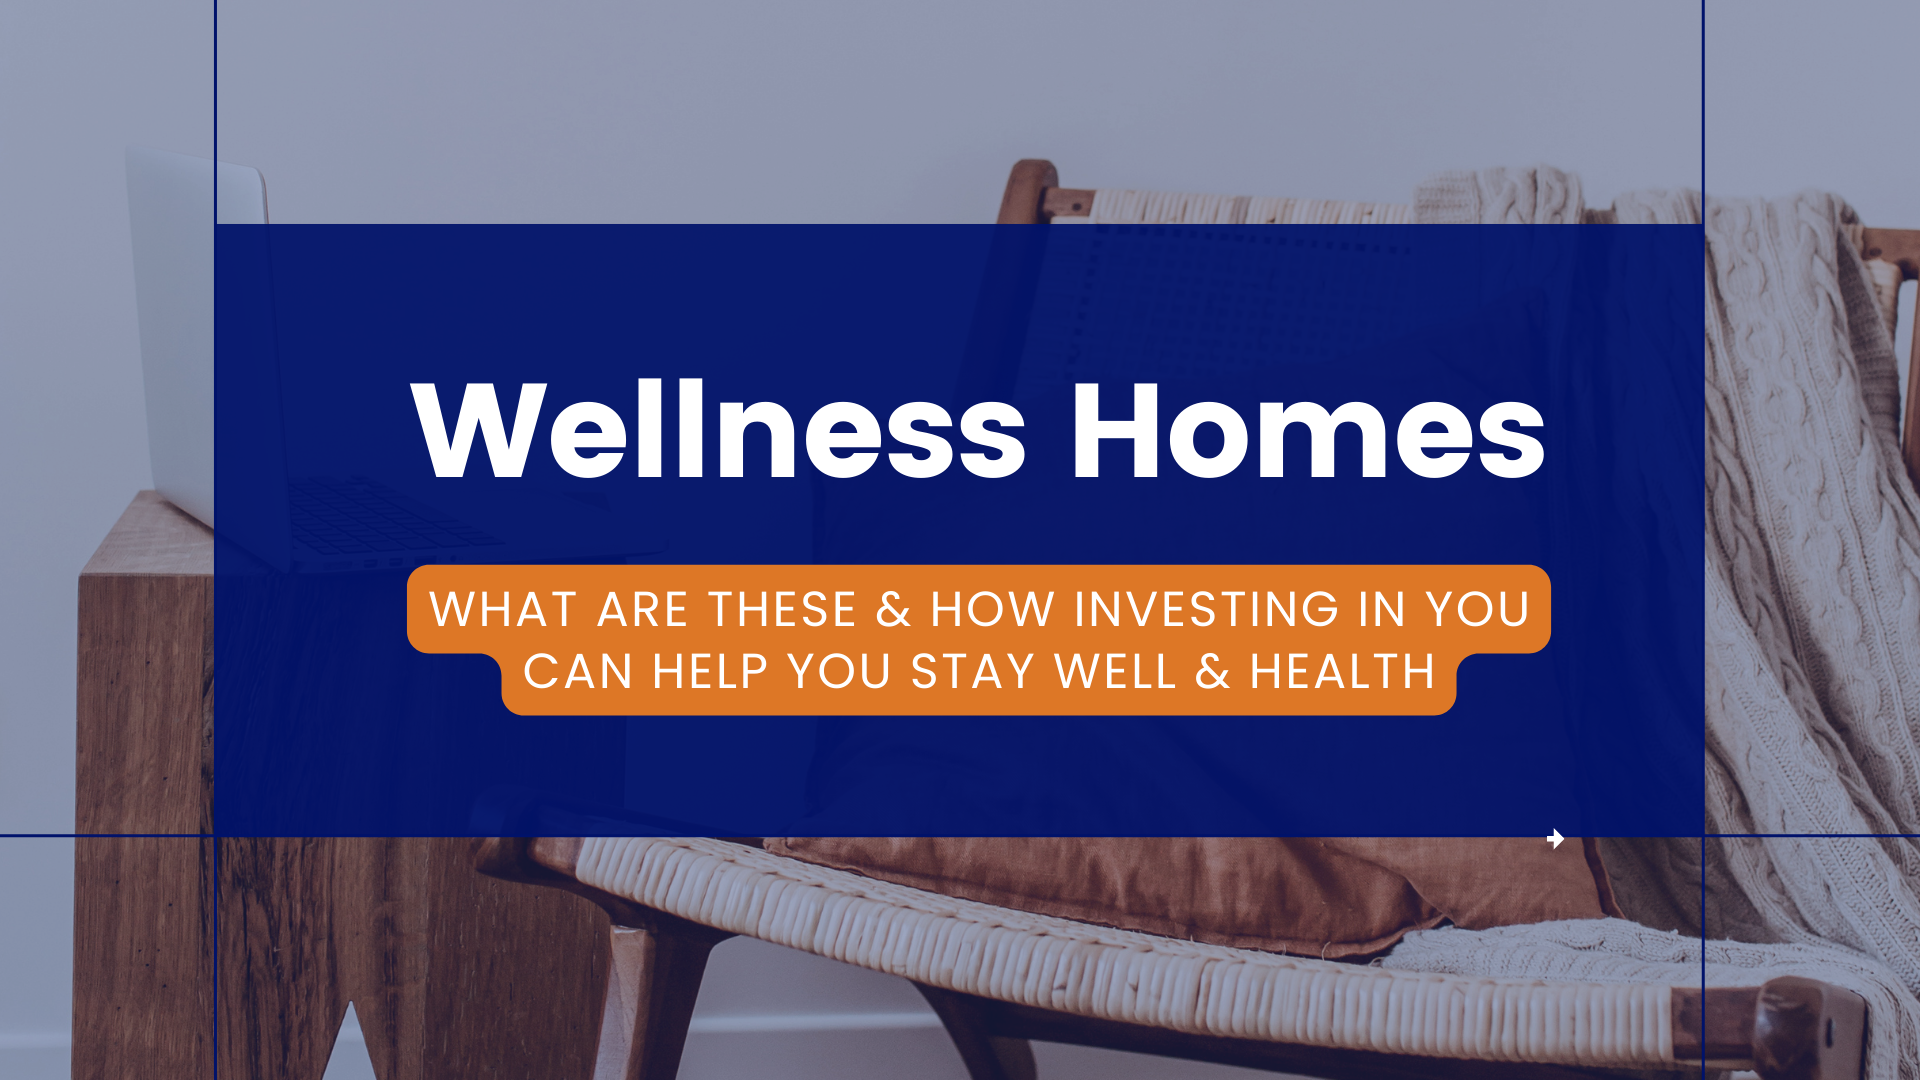 Wellness Homes: What Are These & How Investing in you Can Help You Stay Well & Healthy